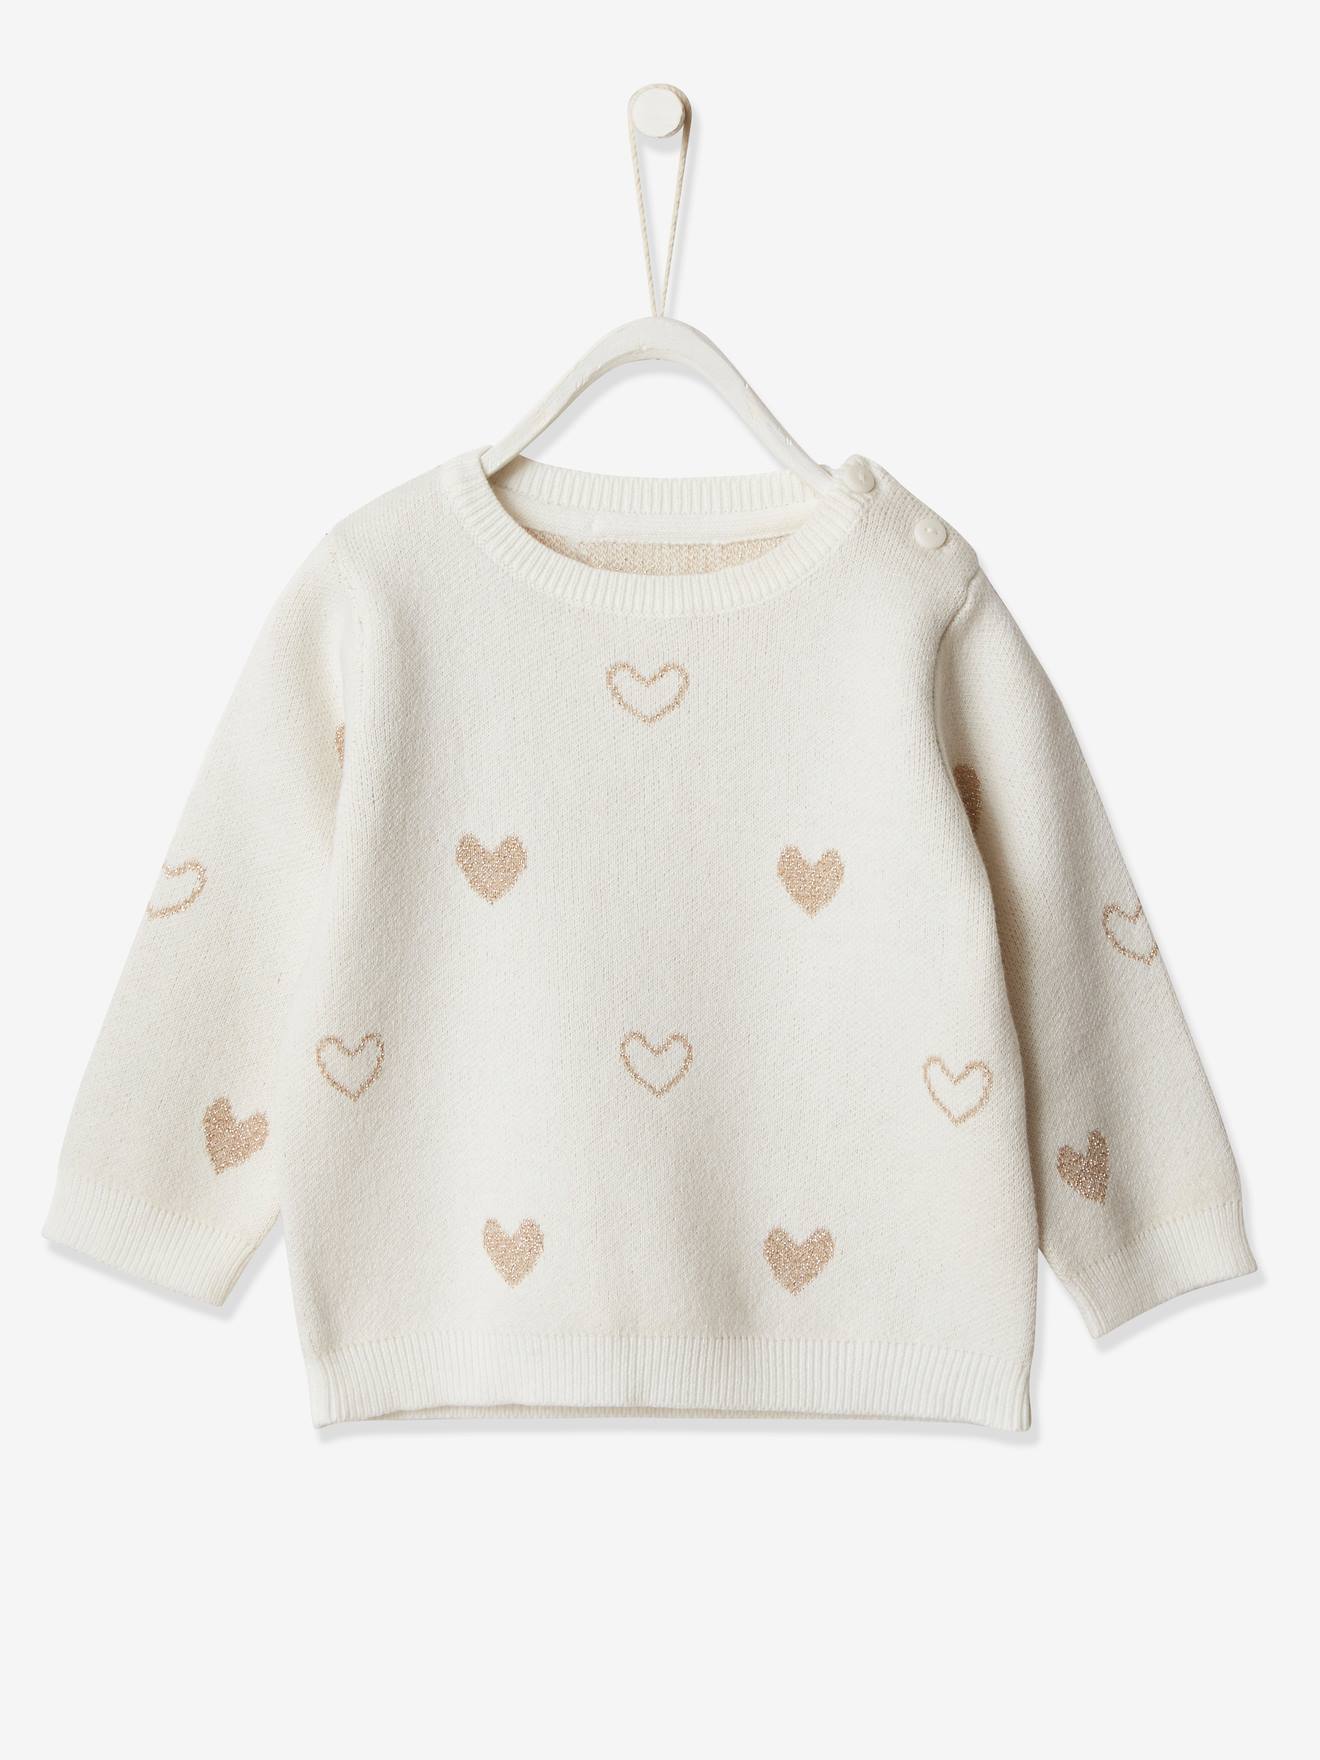 Jumper with Jacquard Knit Hearts for Baby Girls - white, Baby